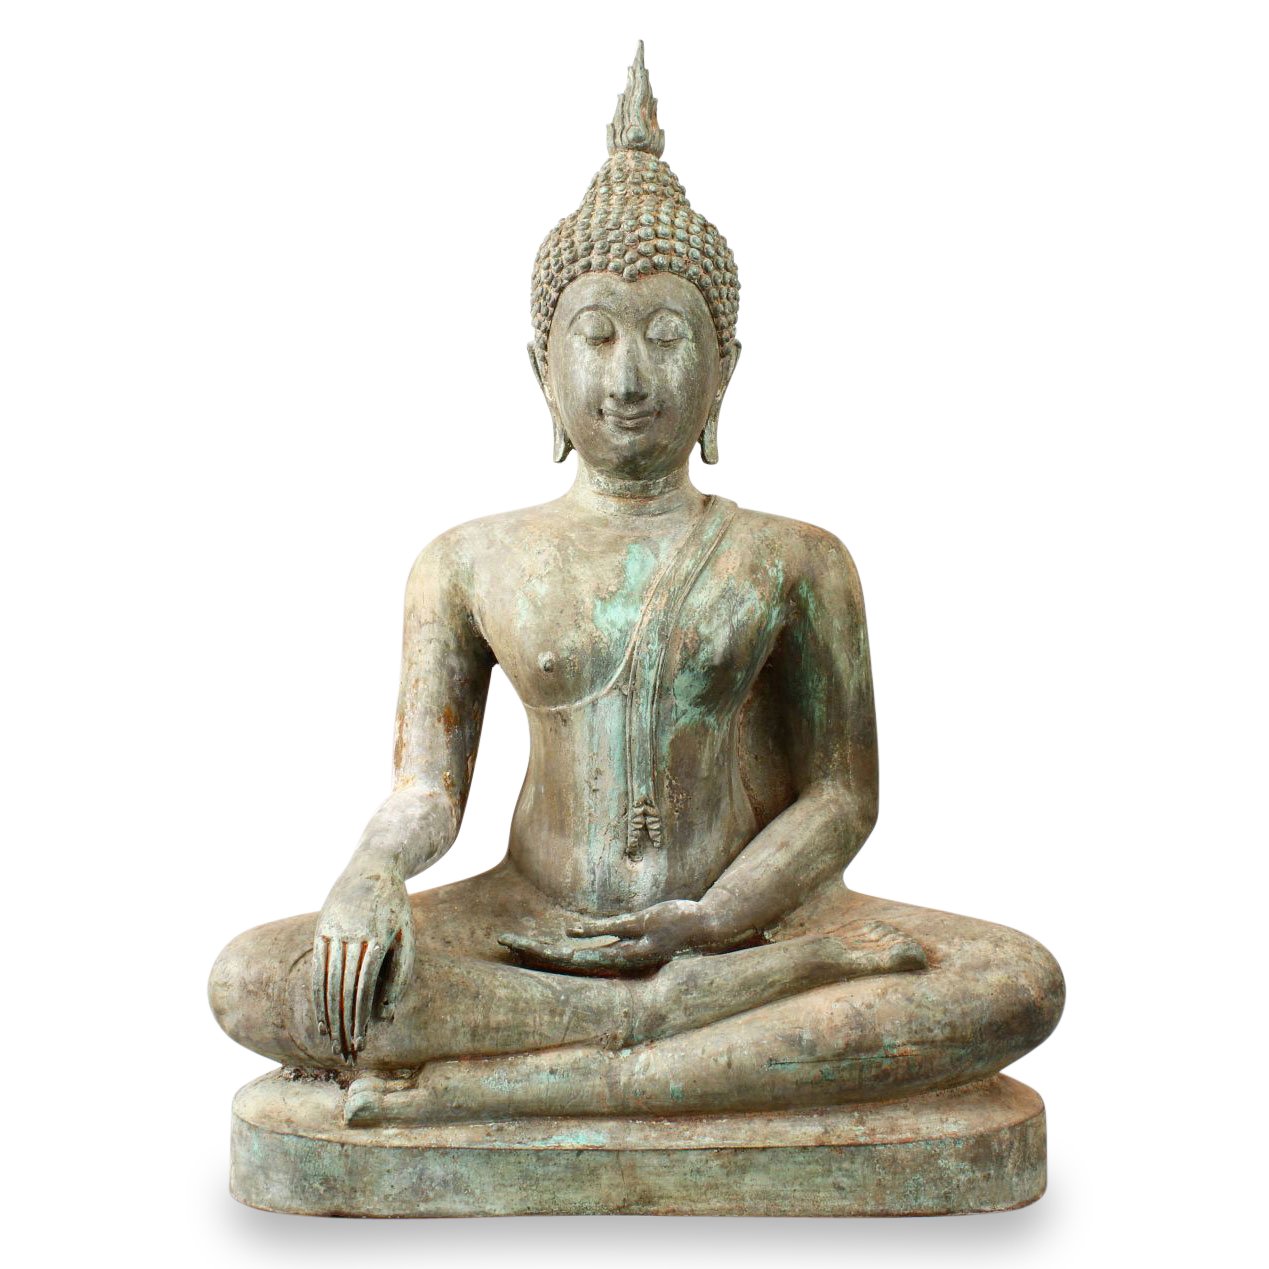 Bronze Buddha From Thailand - 75 - 100 years old - 52 x 76 cms tall 16.5 x 9 x 46cm tall approx - M370